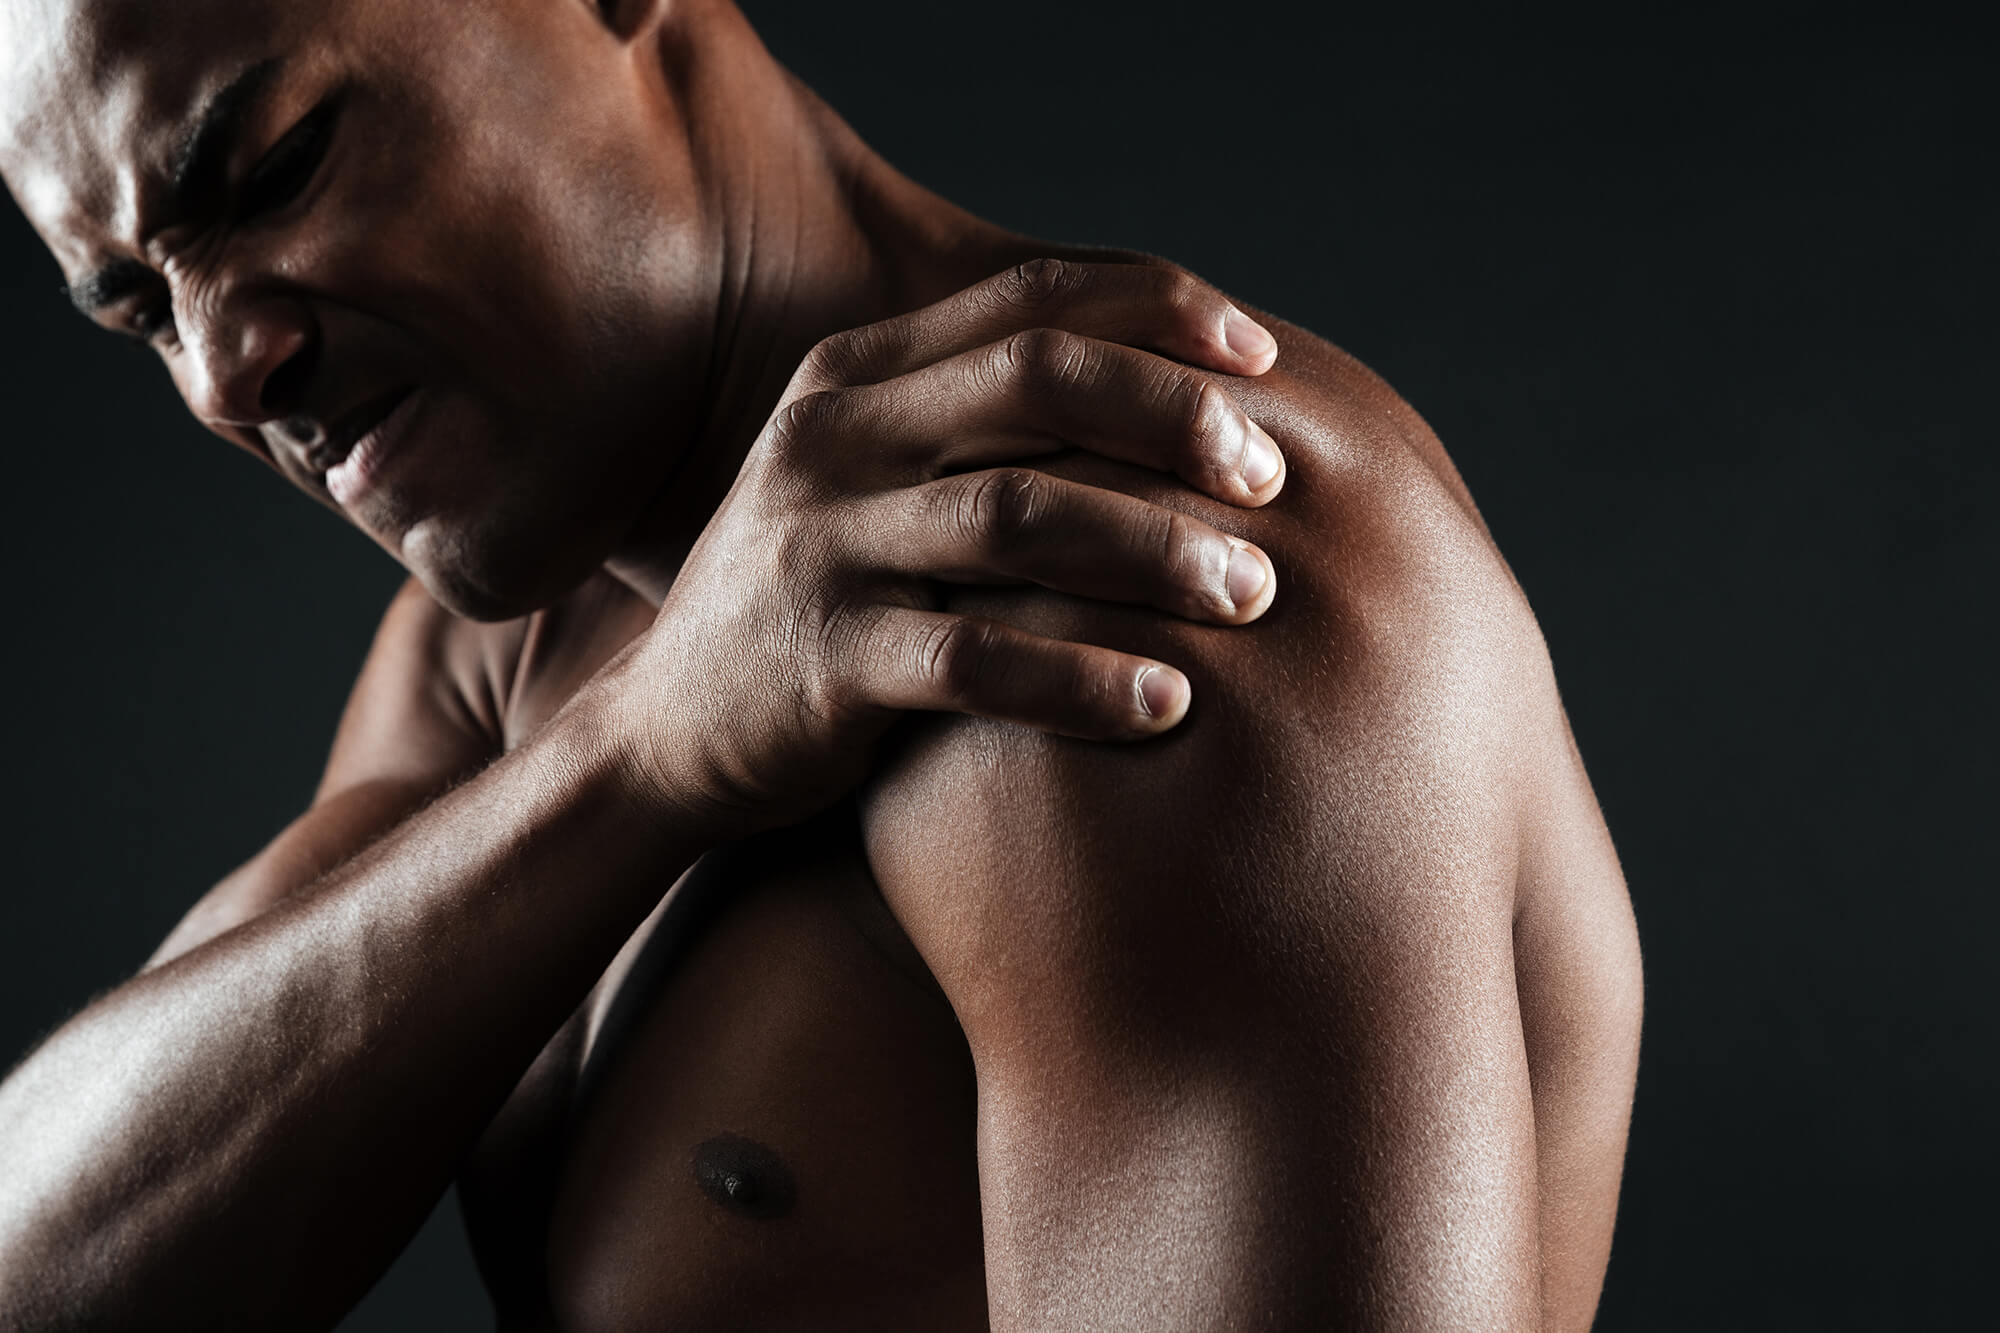 Shoulder pain: Causes and solutions